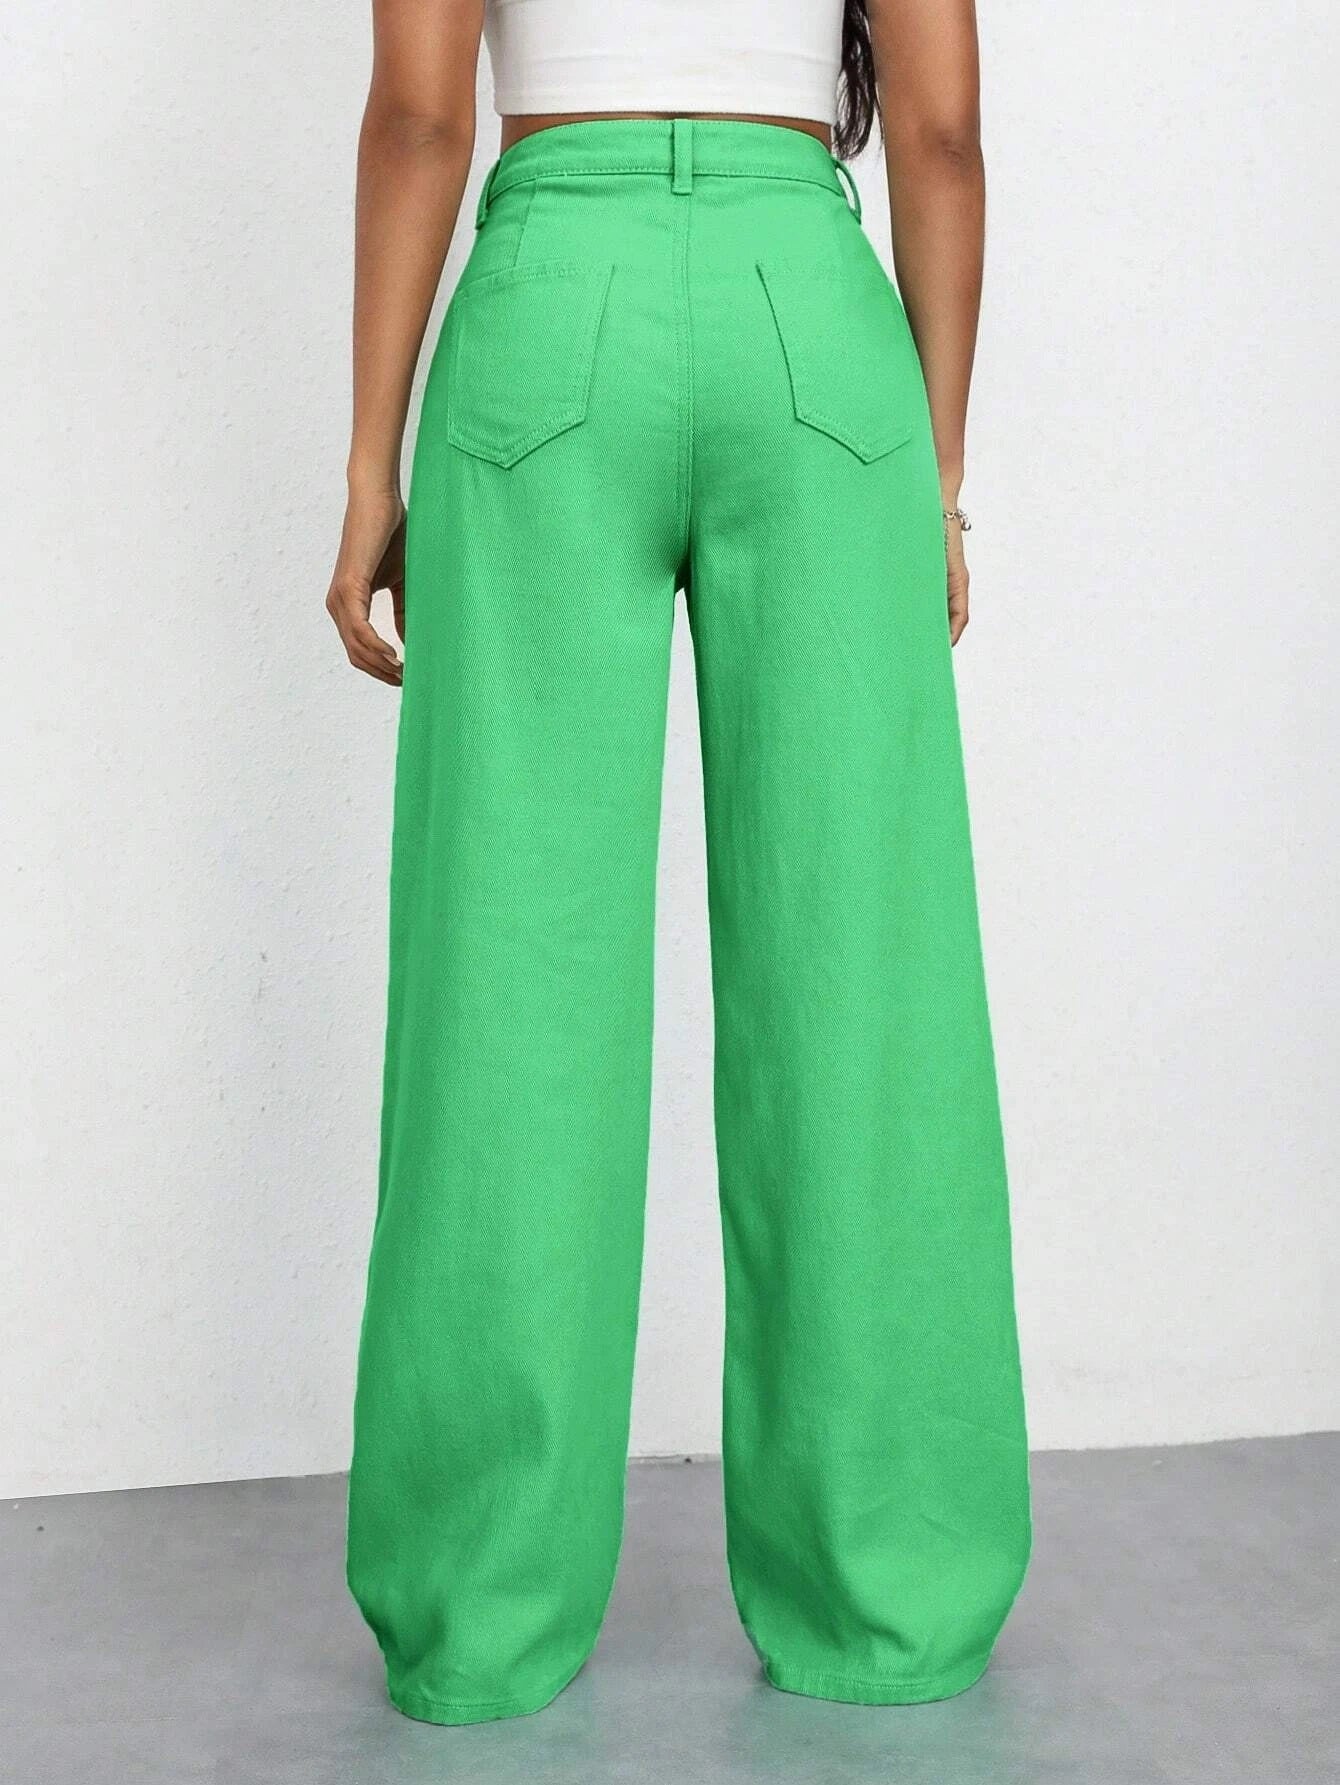 CM-BS663477 Women Casual Seoul Style High Waist Solid Wide Leg Jeans - Green